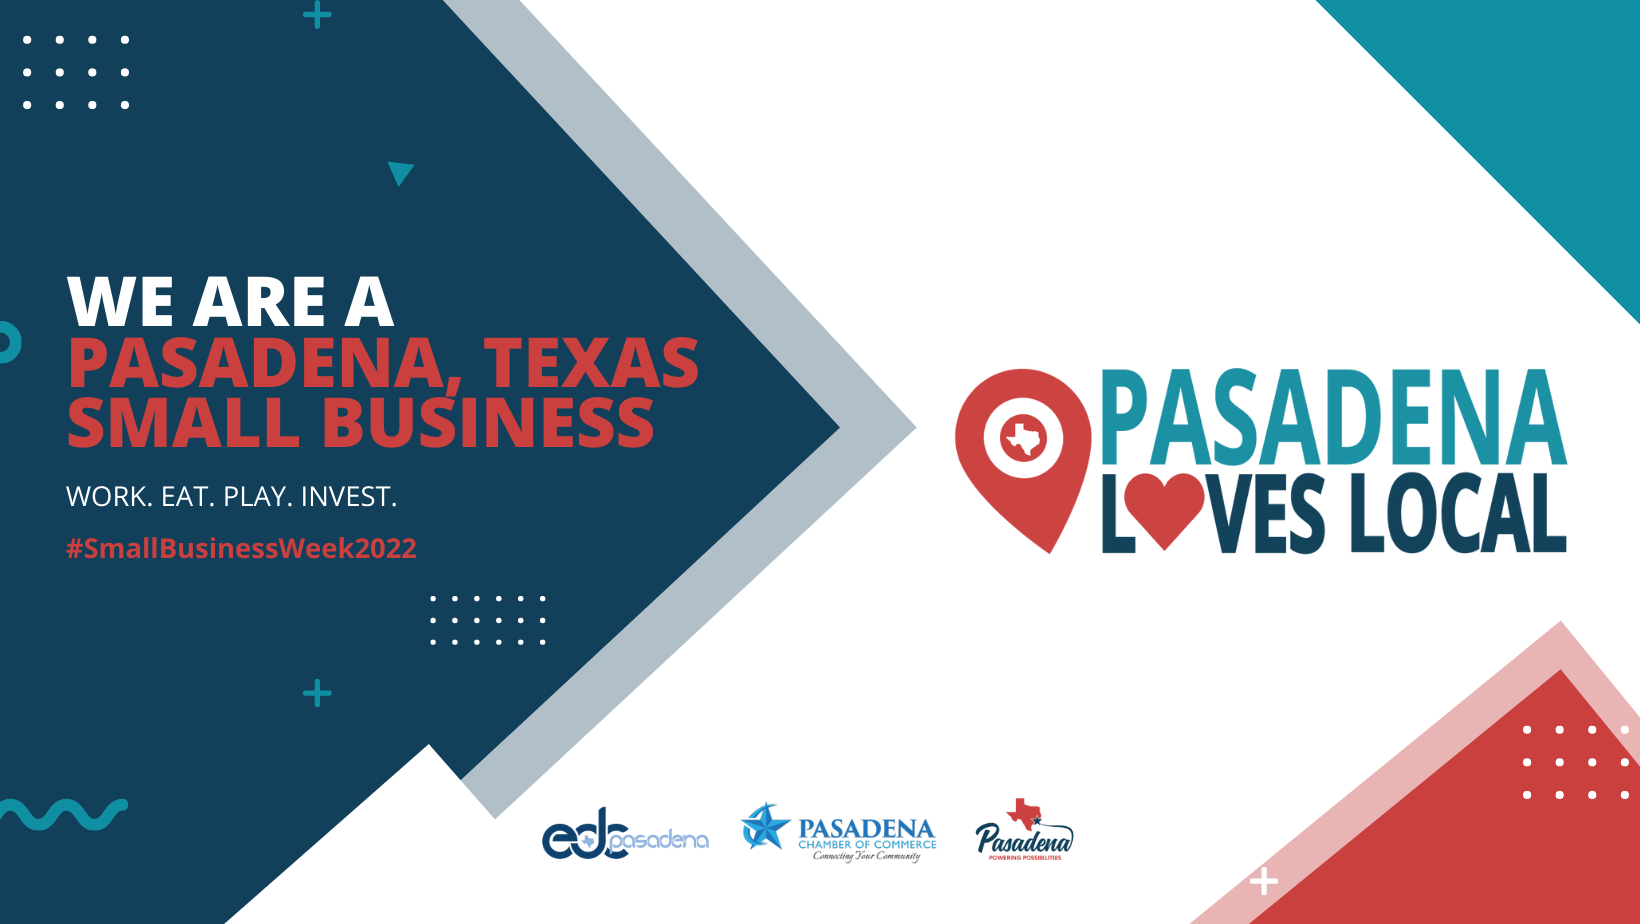 Celebrate Small Business Week with Pasadena Loves Local Photo